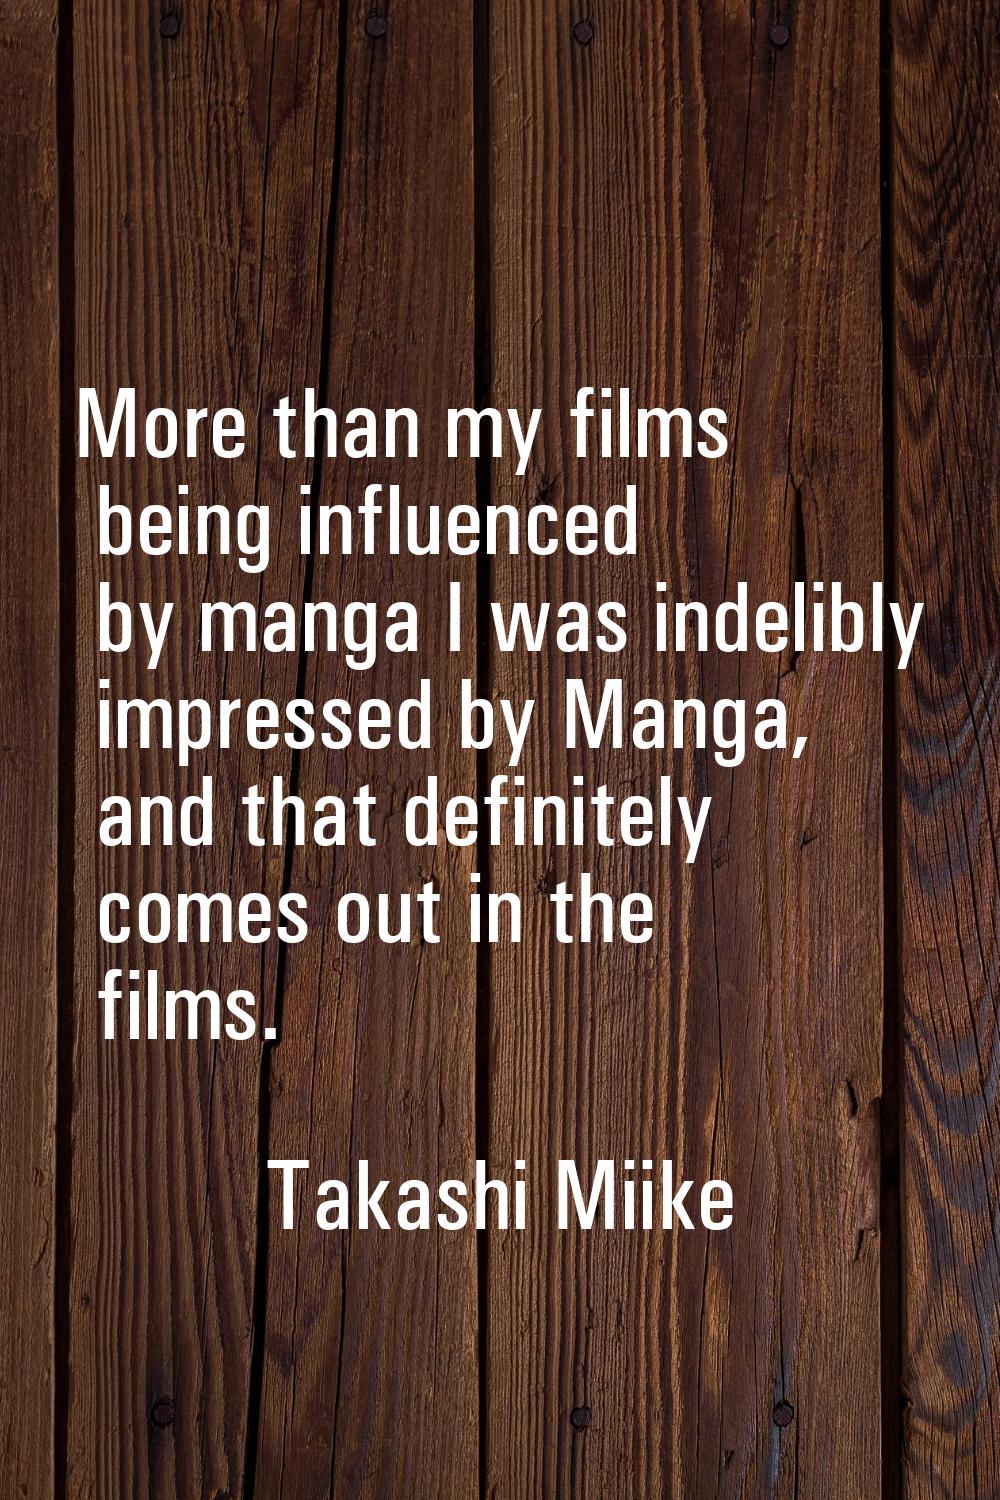 More than my films being influenced by manga I was indelibly impressed by Manga, and that definitel